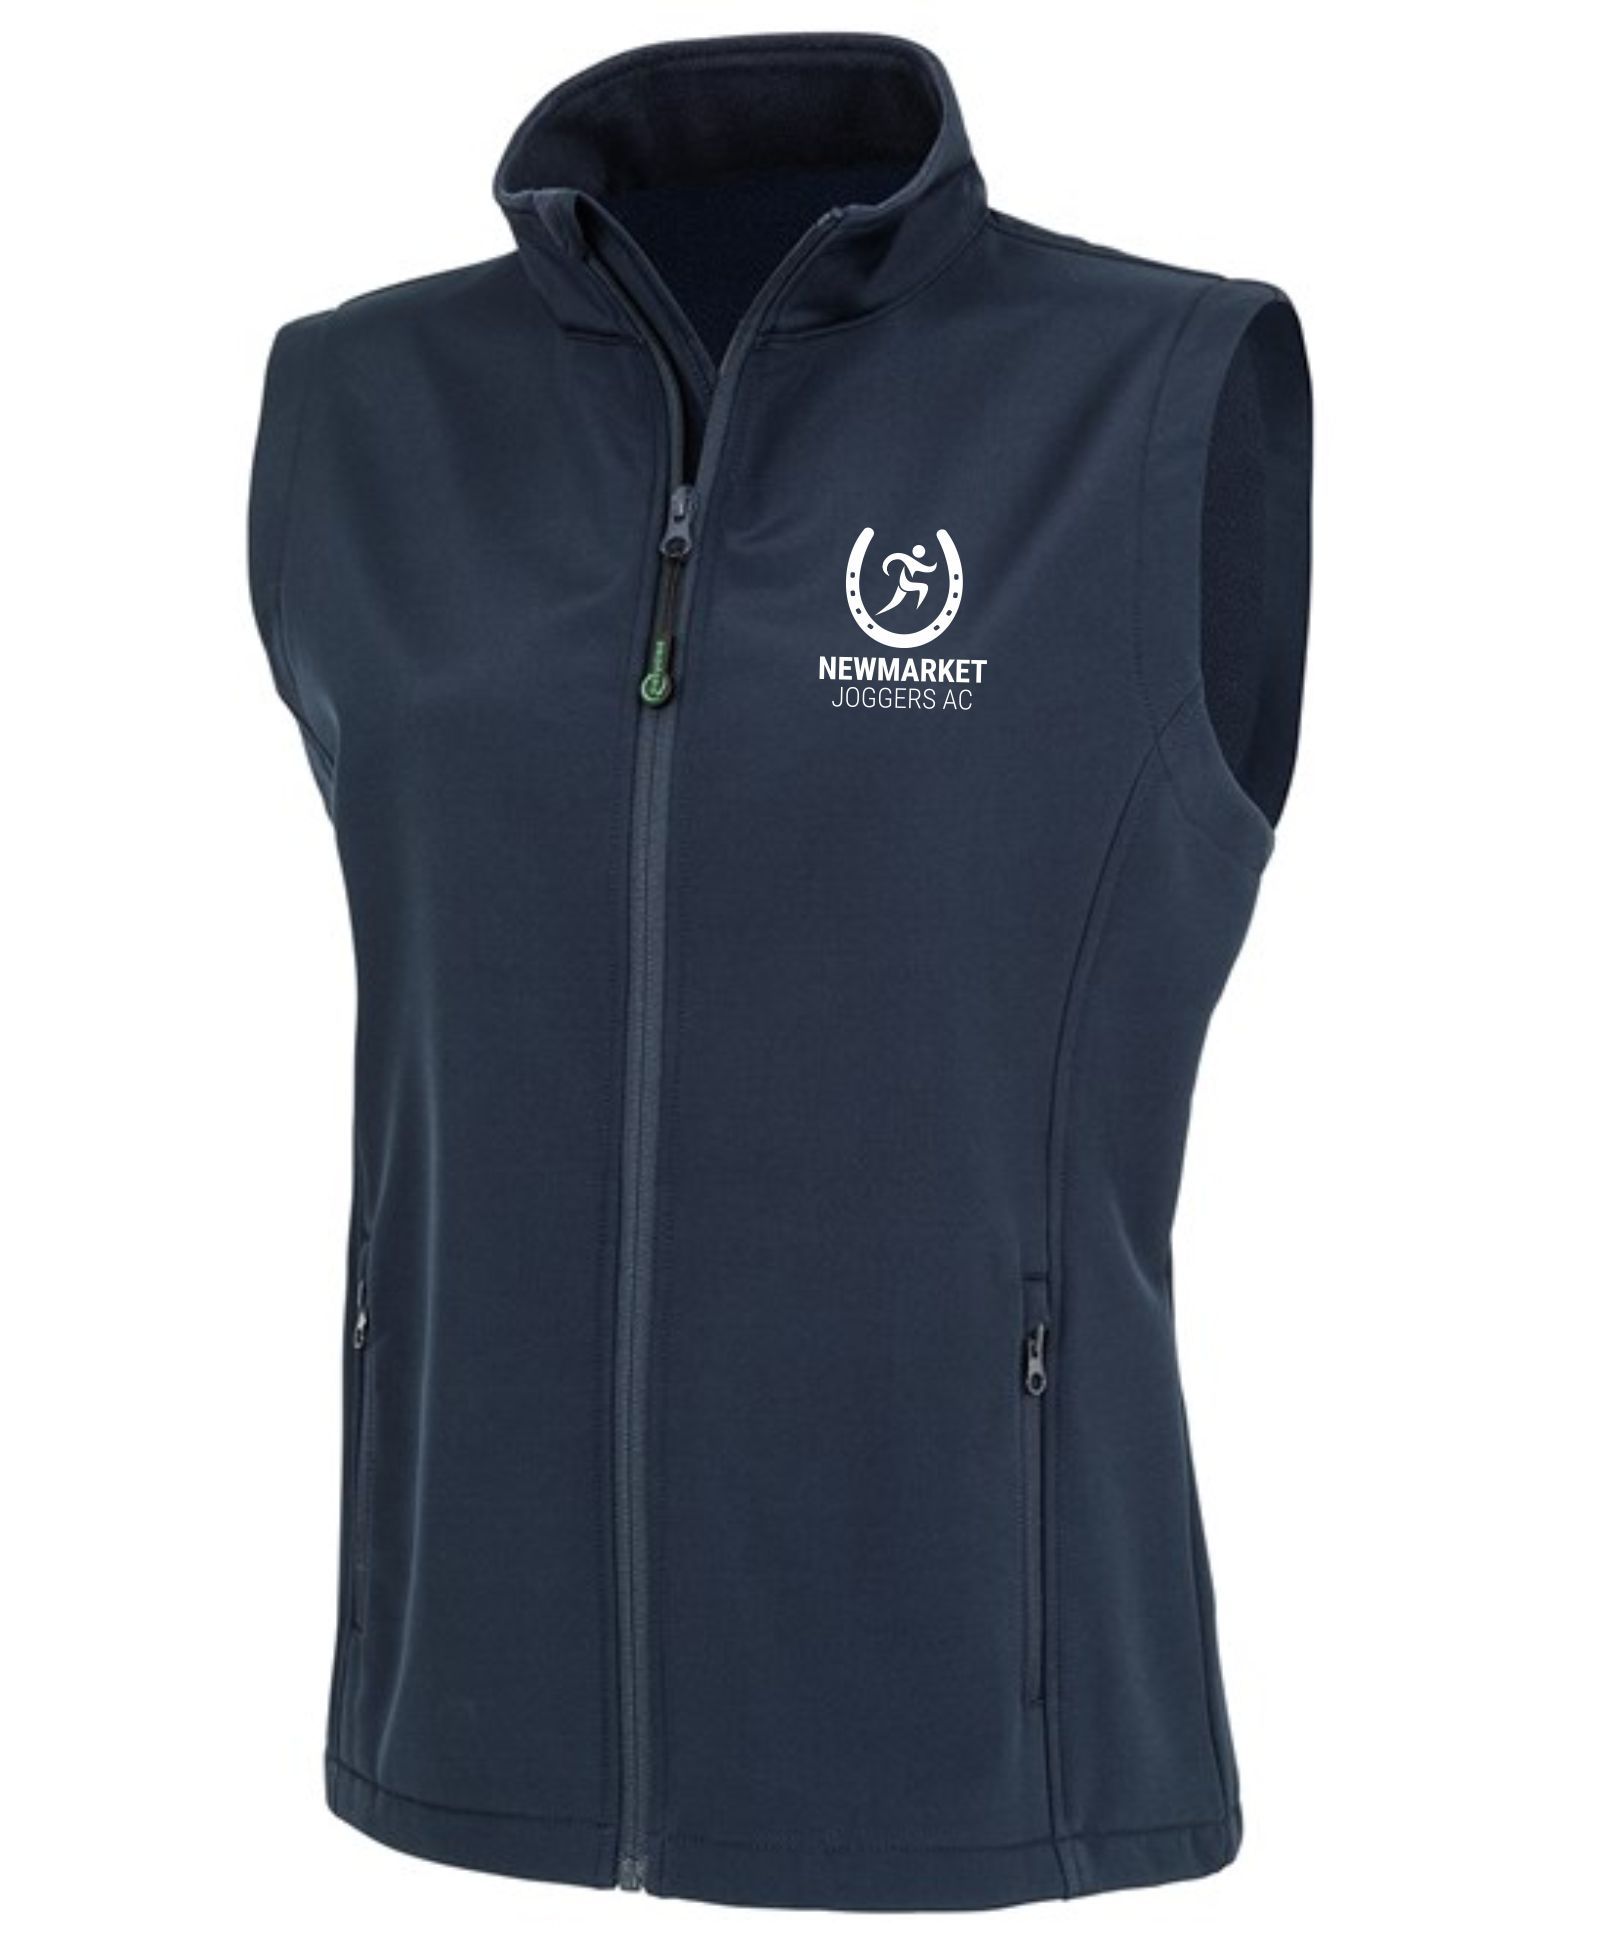 Newmarket Joggers – Outerwear Softshell gilet (Ladies)